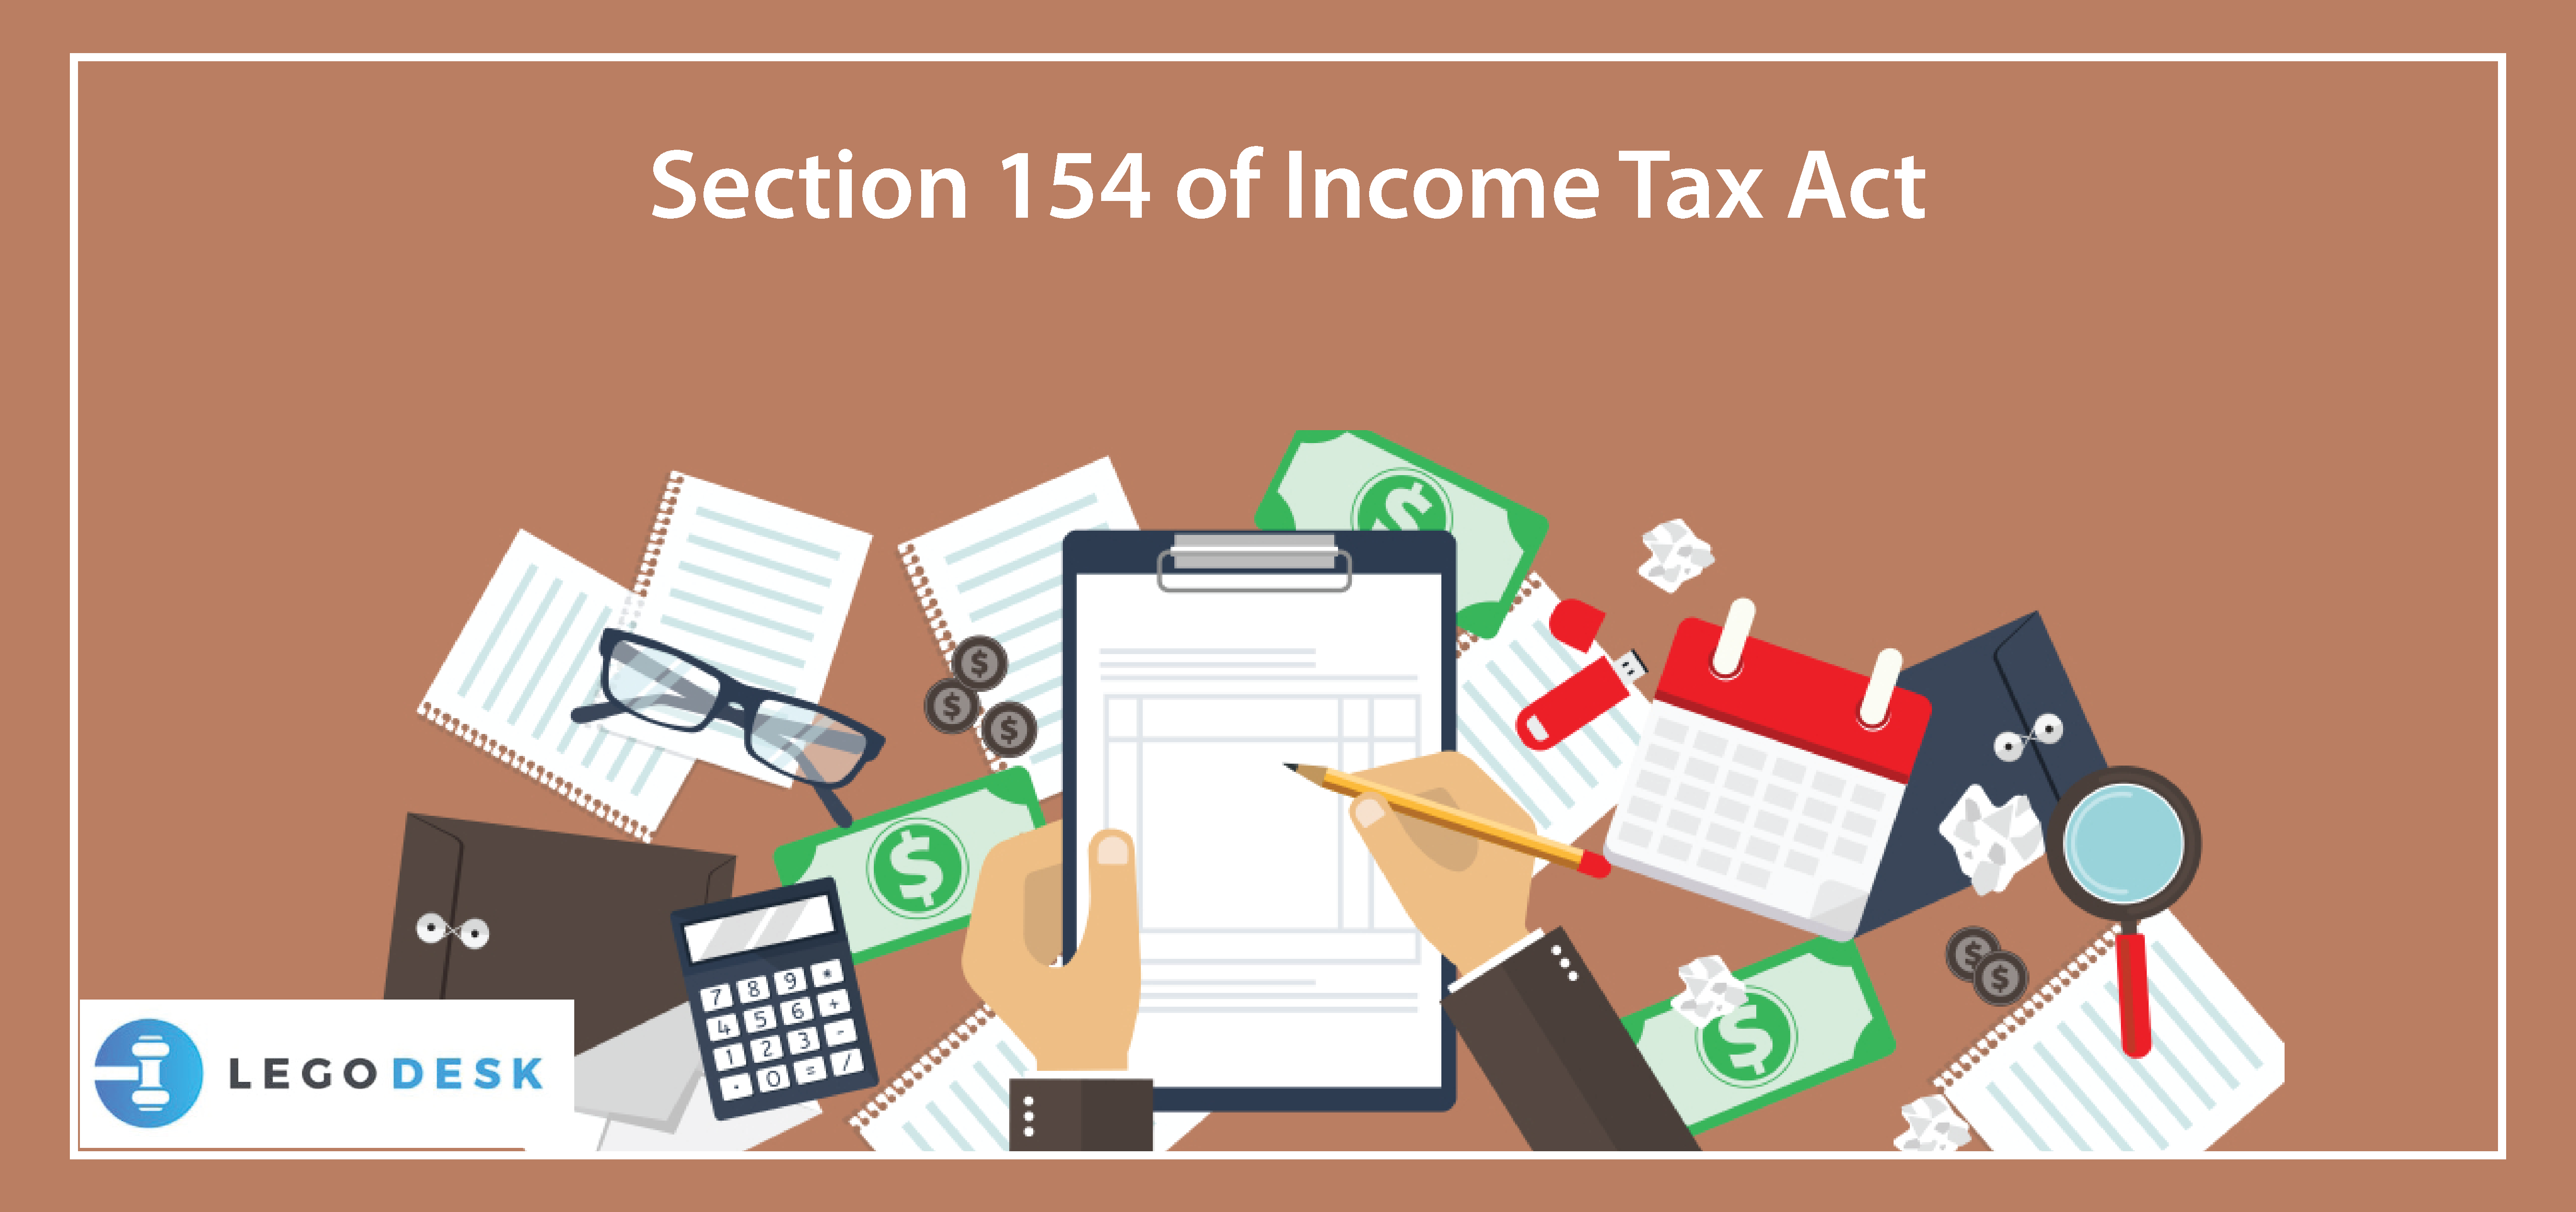 Section 154 of Income Tax Act